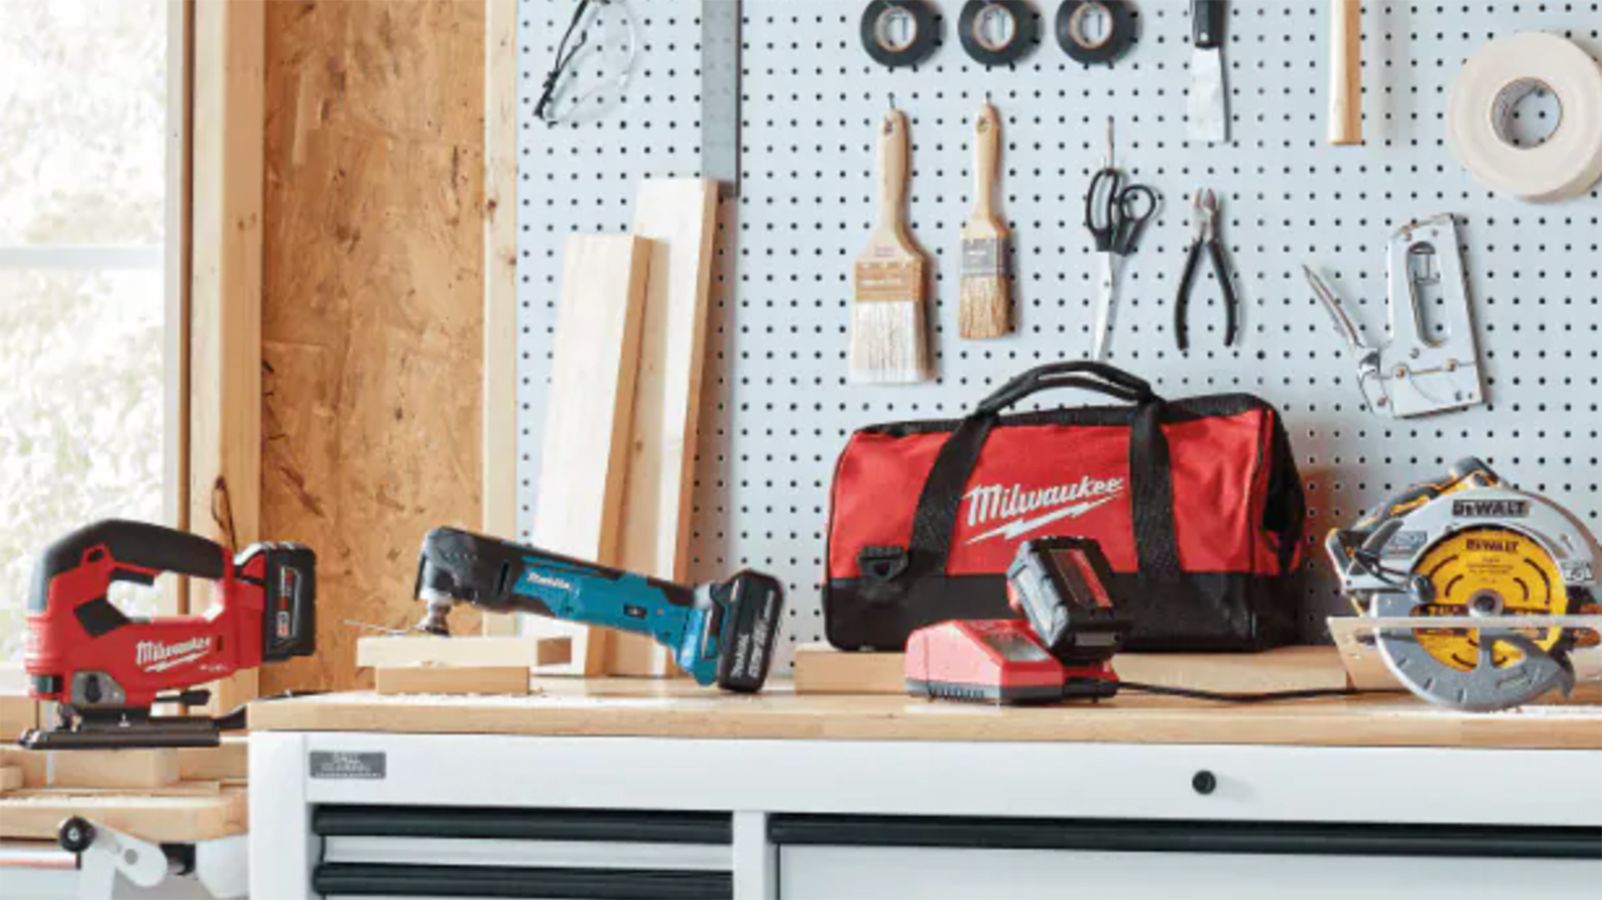 sale:  Sale offers today: Best deals on Tools and Home  Improvement items revealed - The Economic Times